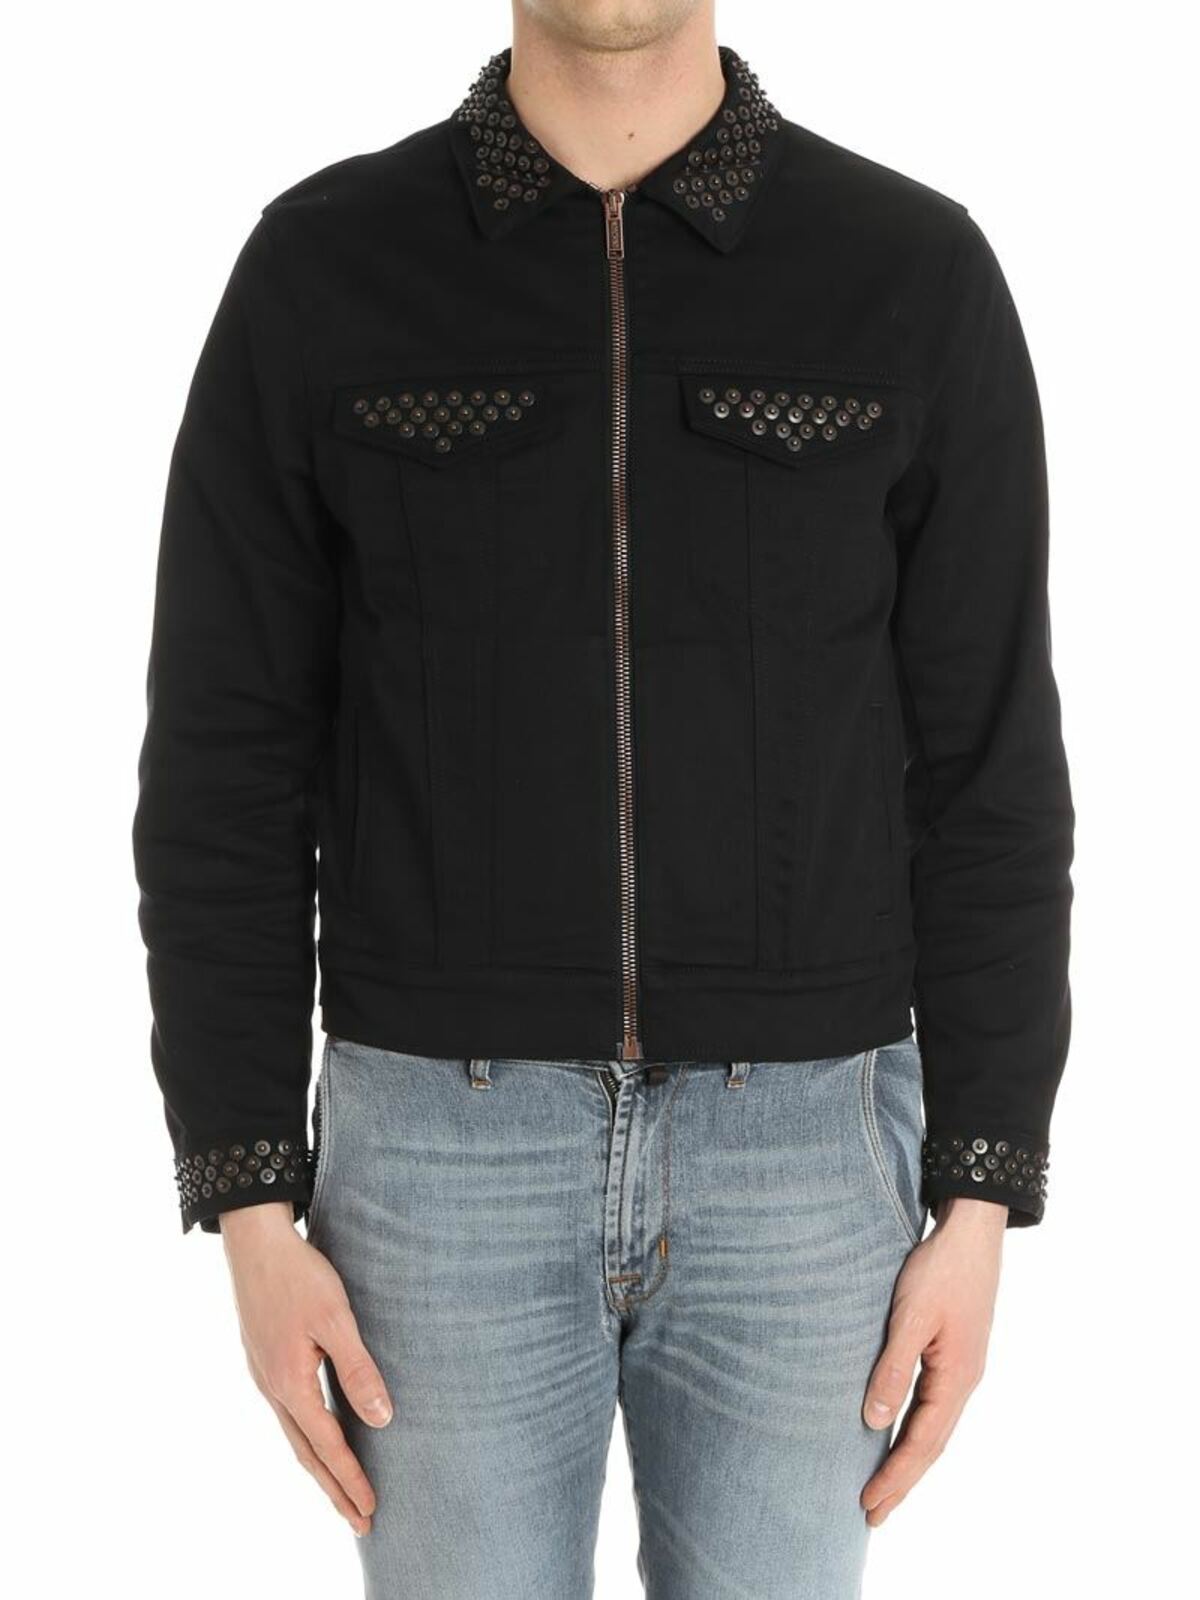 Moschino Black Jacket With Applied Buttons